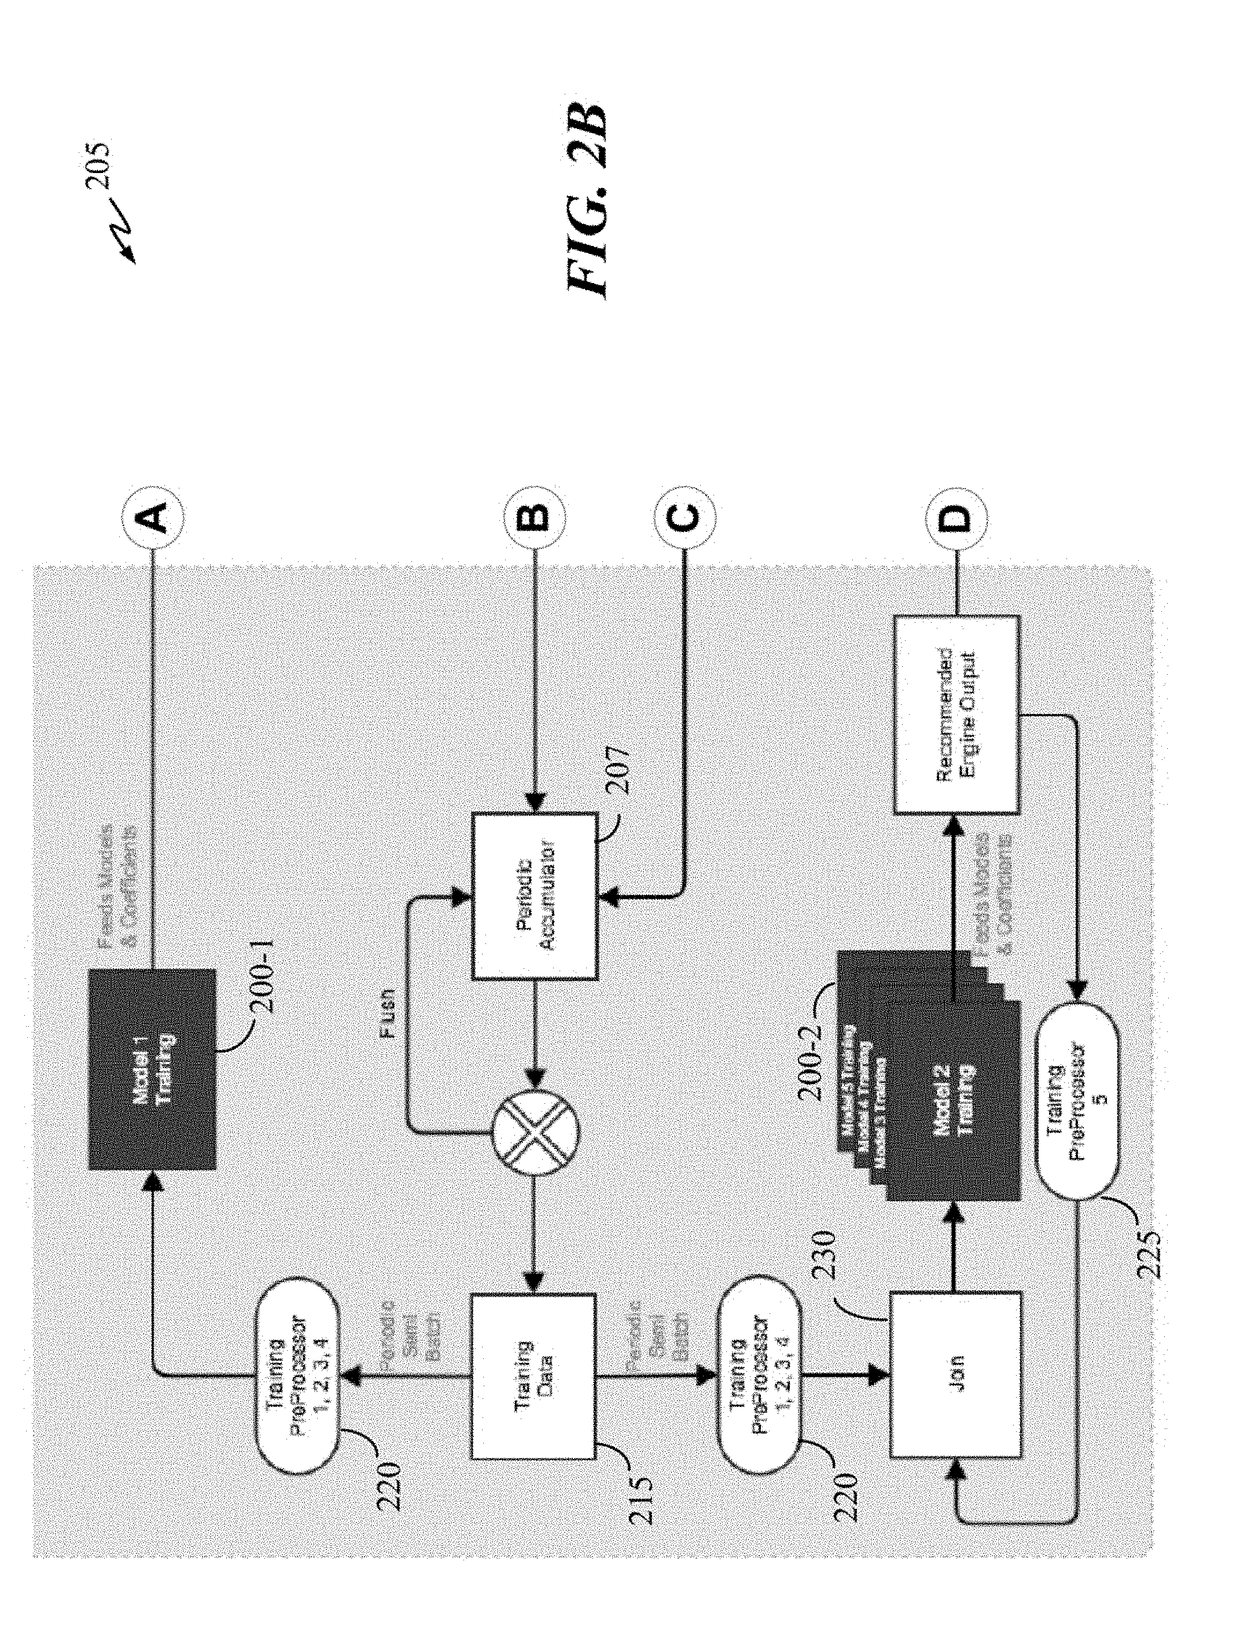 Methods and systems for optimizing engine selection using machine learning modeling